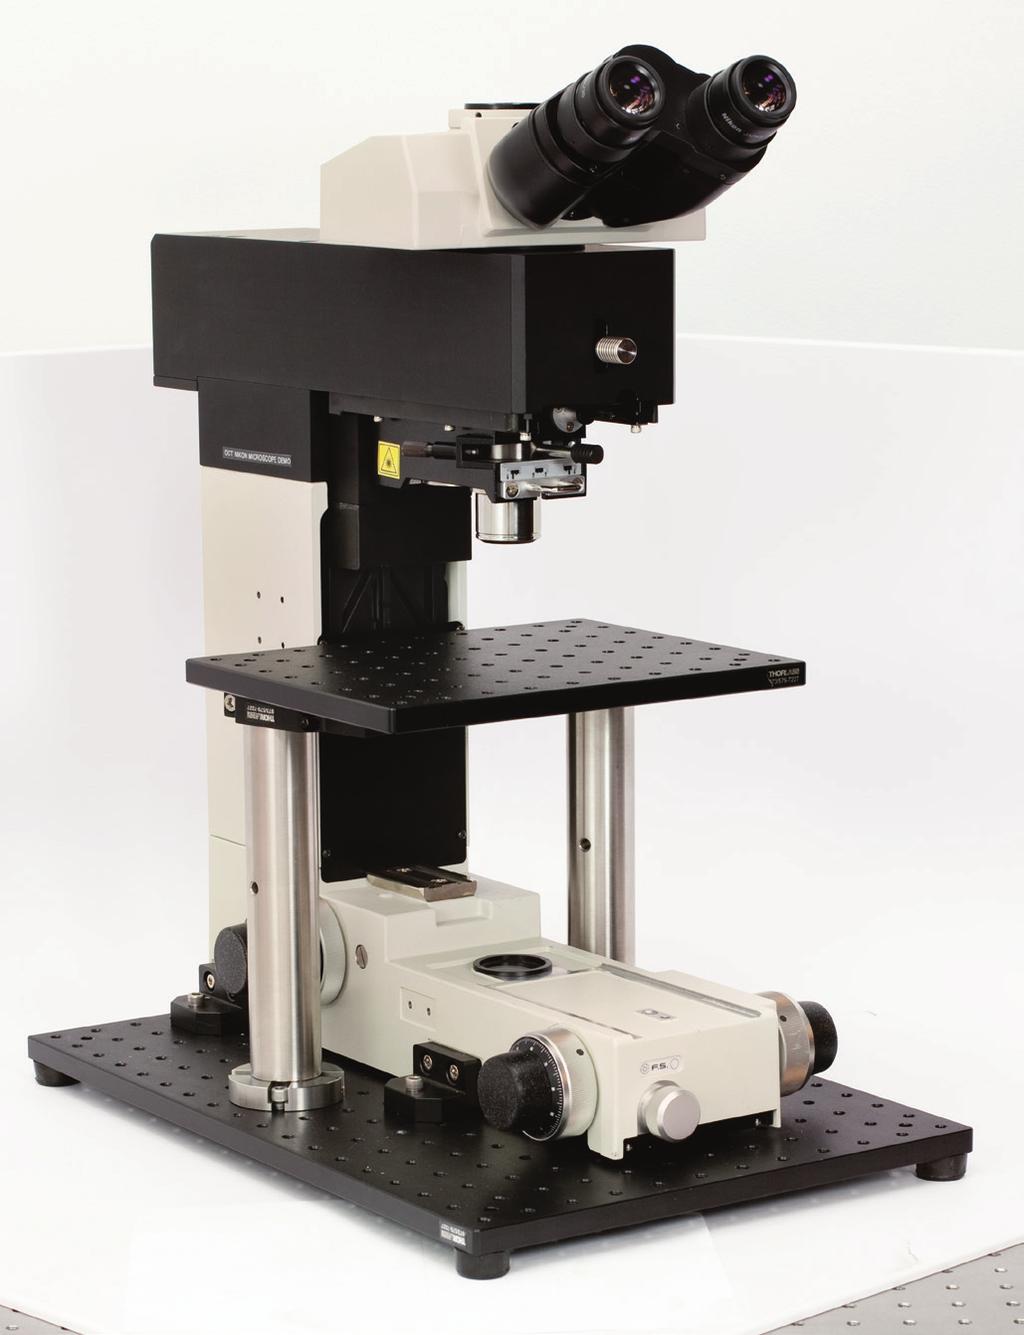 on Nikon FN1 Microscope Features n Ideal for Real-Time Imaging of Biological Samples n Utilizes Thorlabs SS- Engine and ThorImage Software n Built Upon the Nikon Eclipse FN1 Upright Microscope n